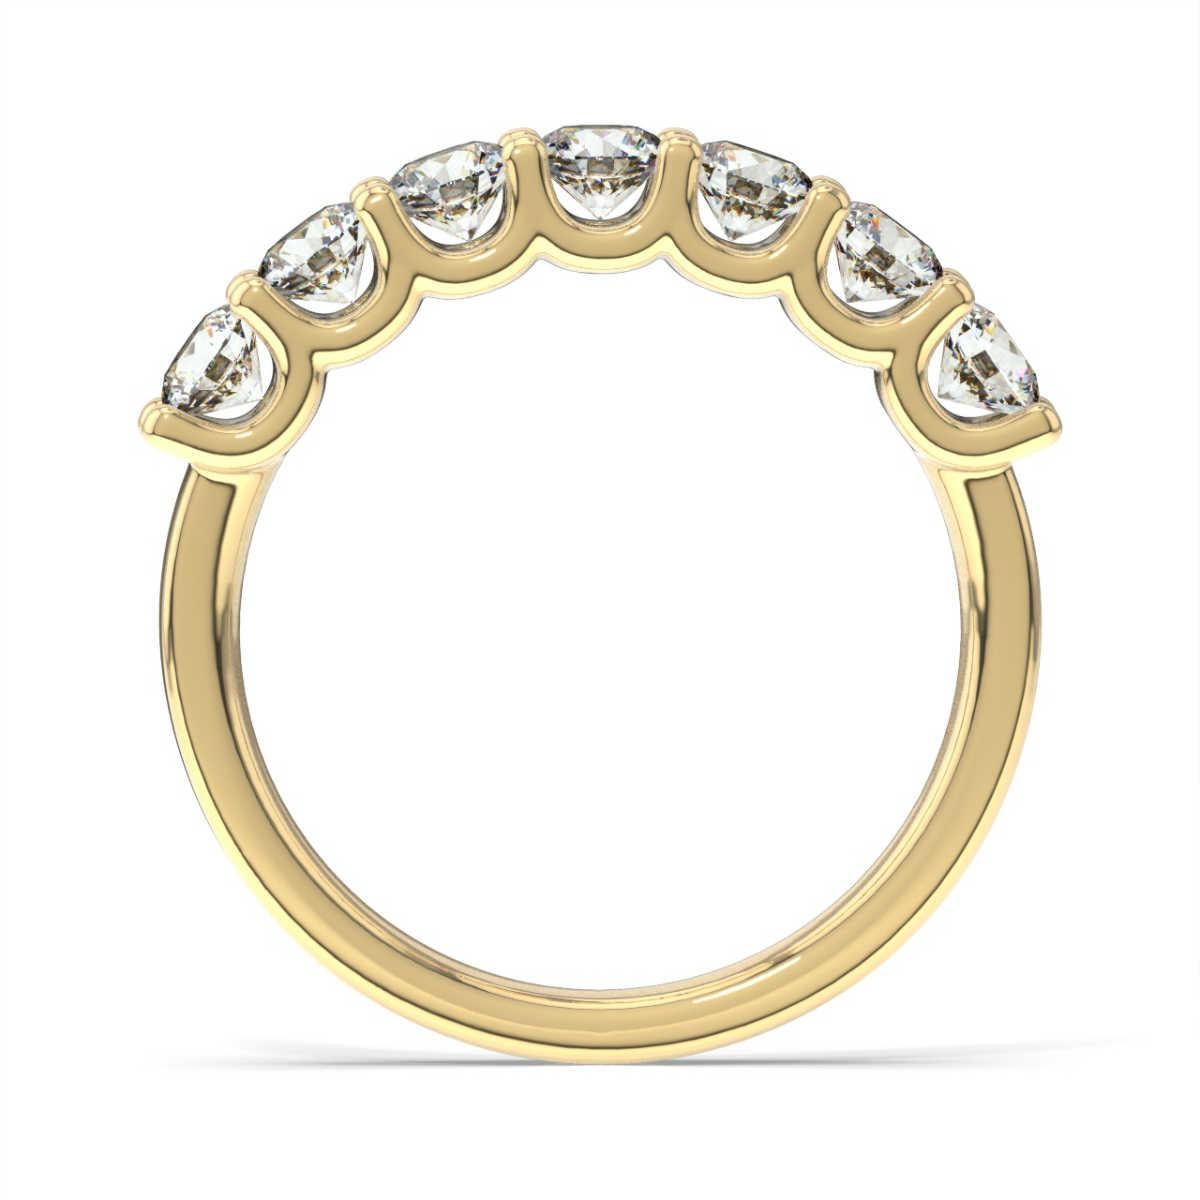 This ring features 7 round brilliant diamonds in a total weight of 1 carat set in a delicate 